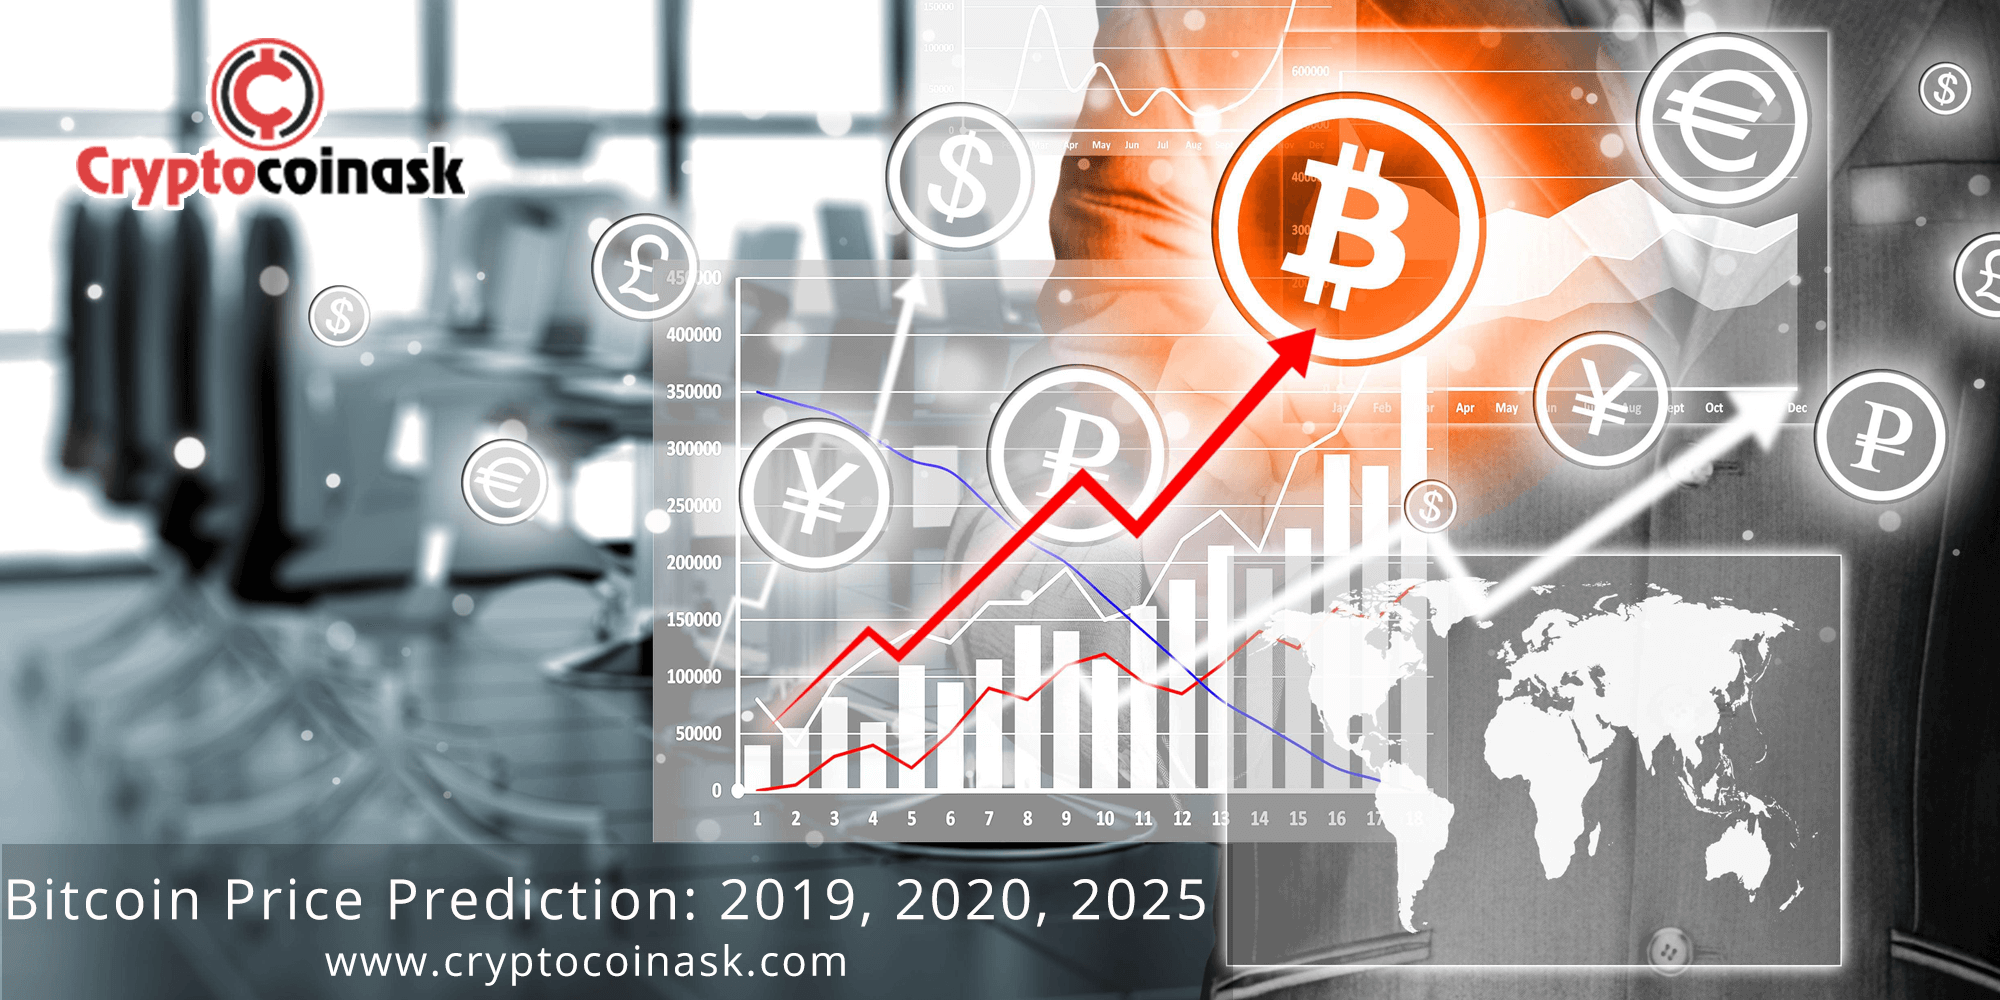 Bitcoin Price Prediction 2019 2020 2025 From Different Experts - 